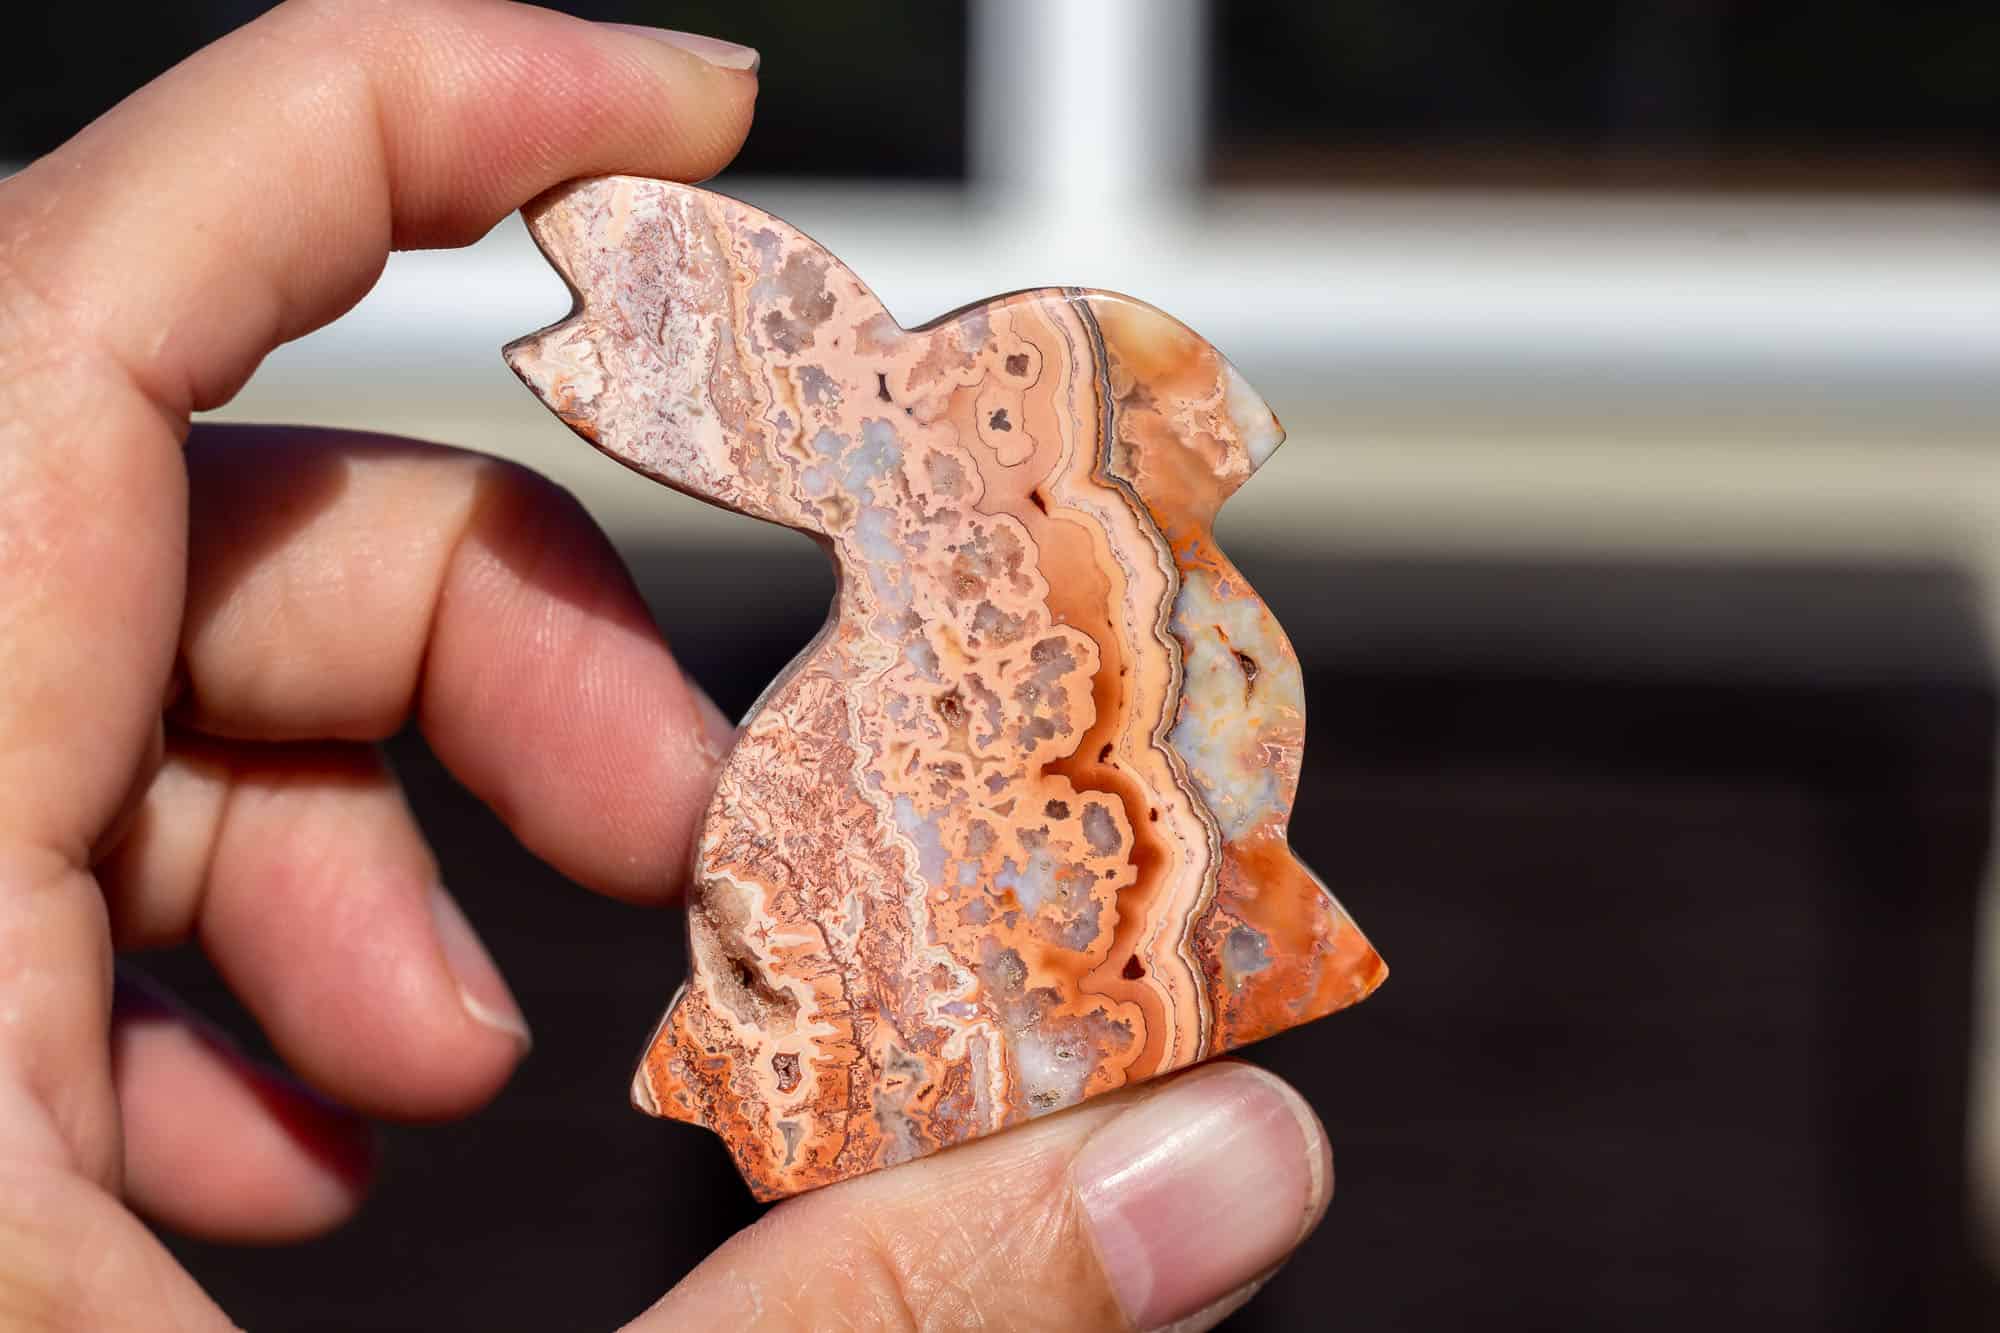 A hand holding a pink crazy lace agate rabbit carving.